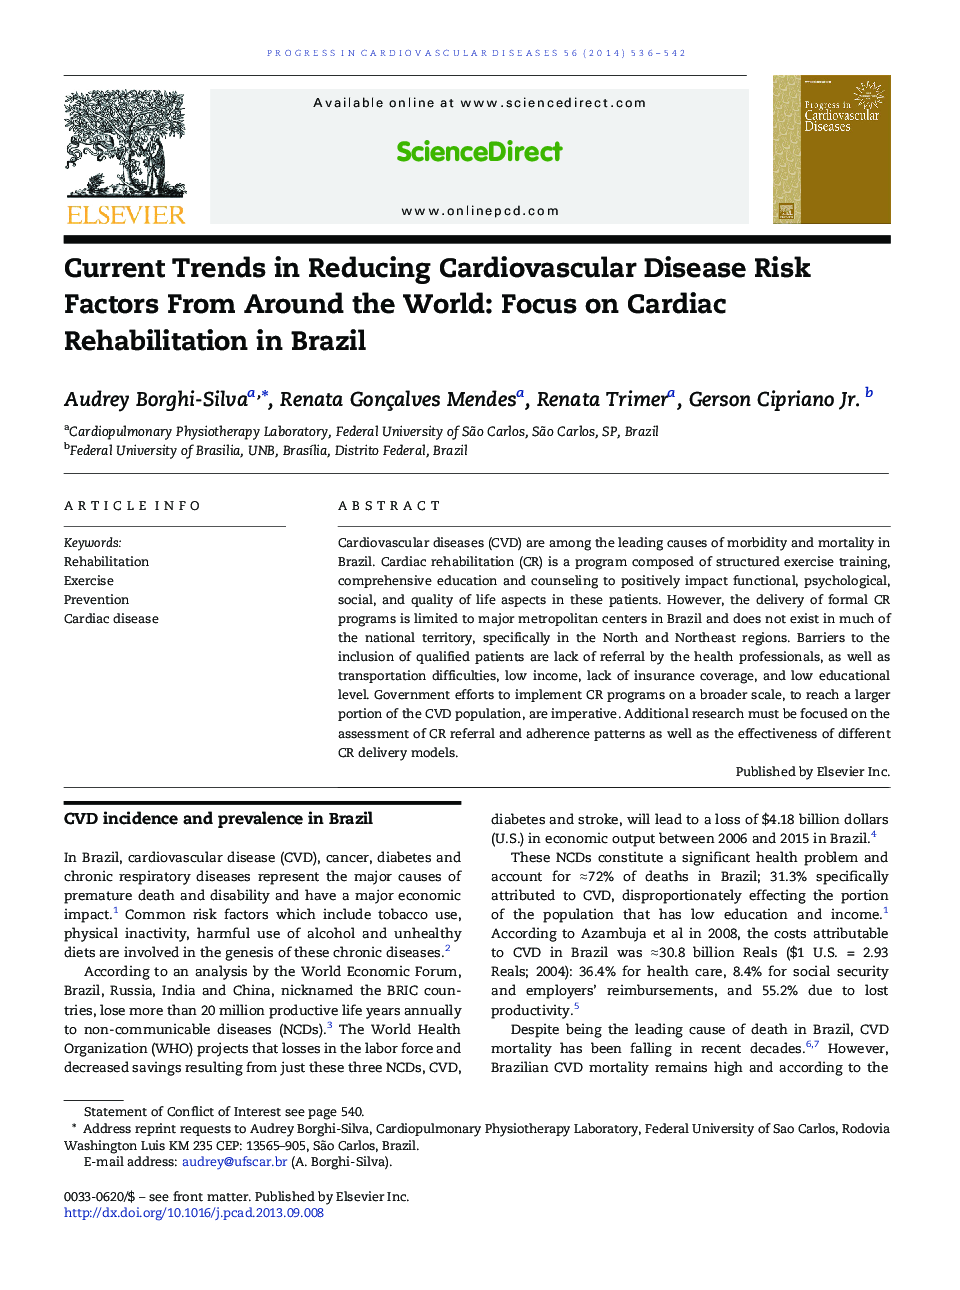 Current Trends in Reducing Cardiovascular Disease Risk Factors From Around the World: Focus on Cardiac Rehabilitation in Brazil